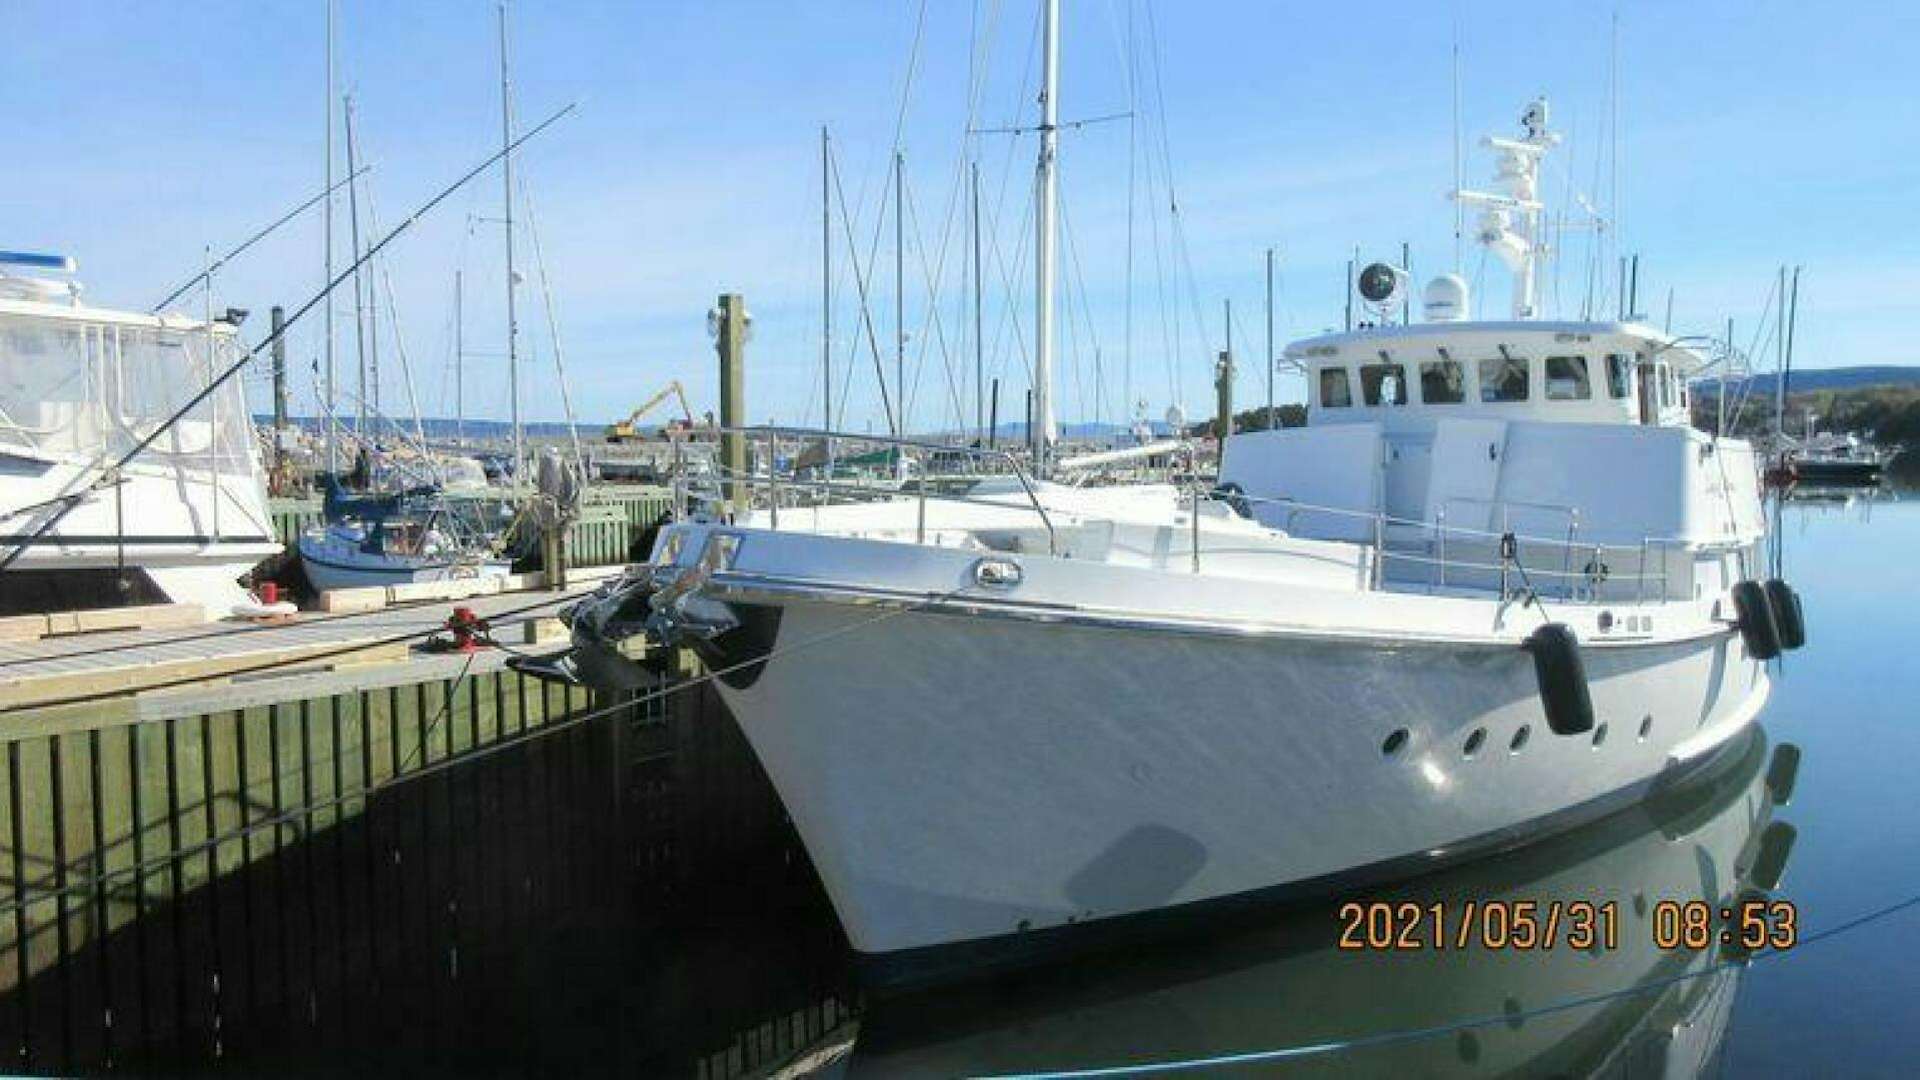 Lady nora ii
Yacht for Sale